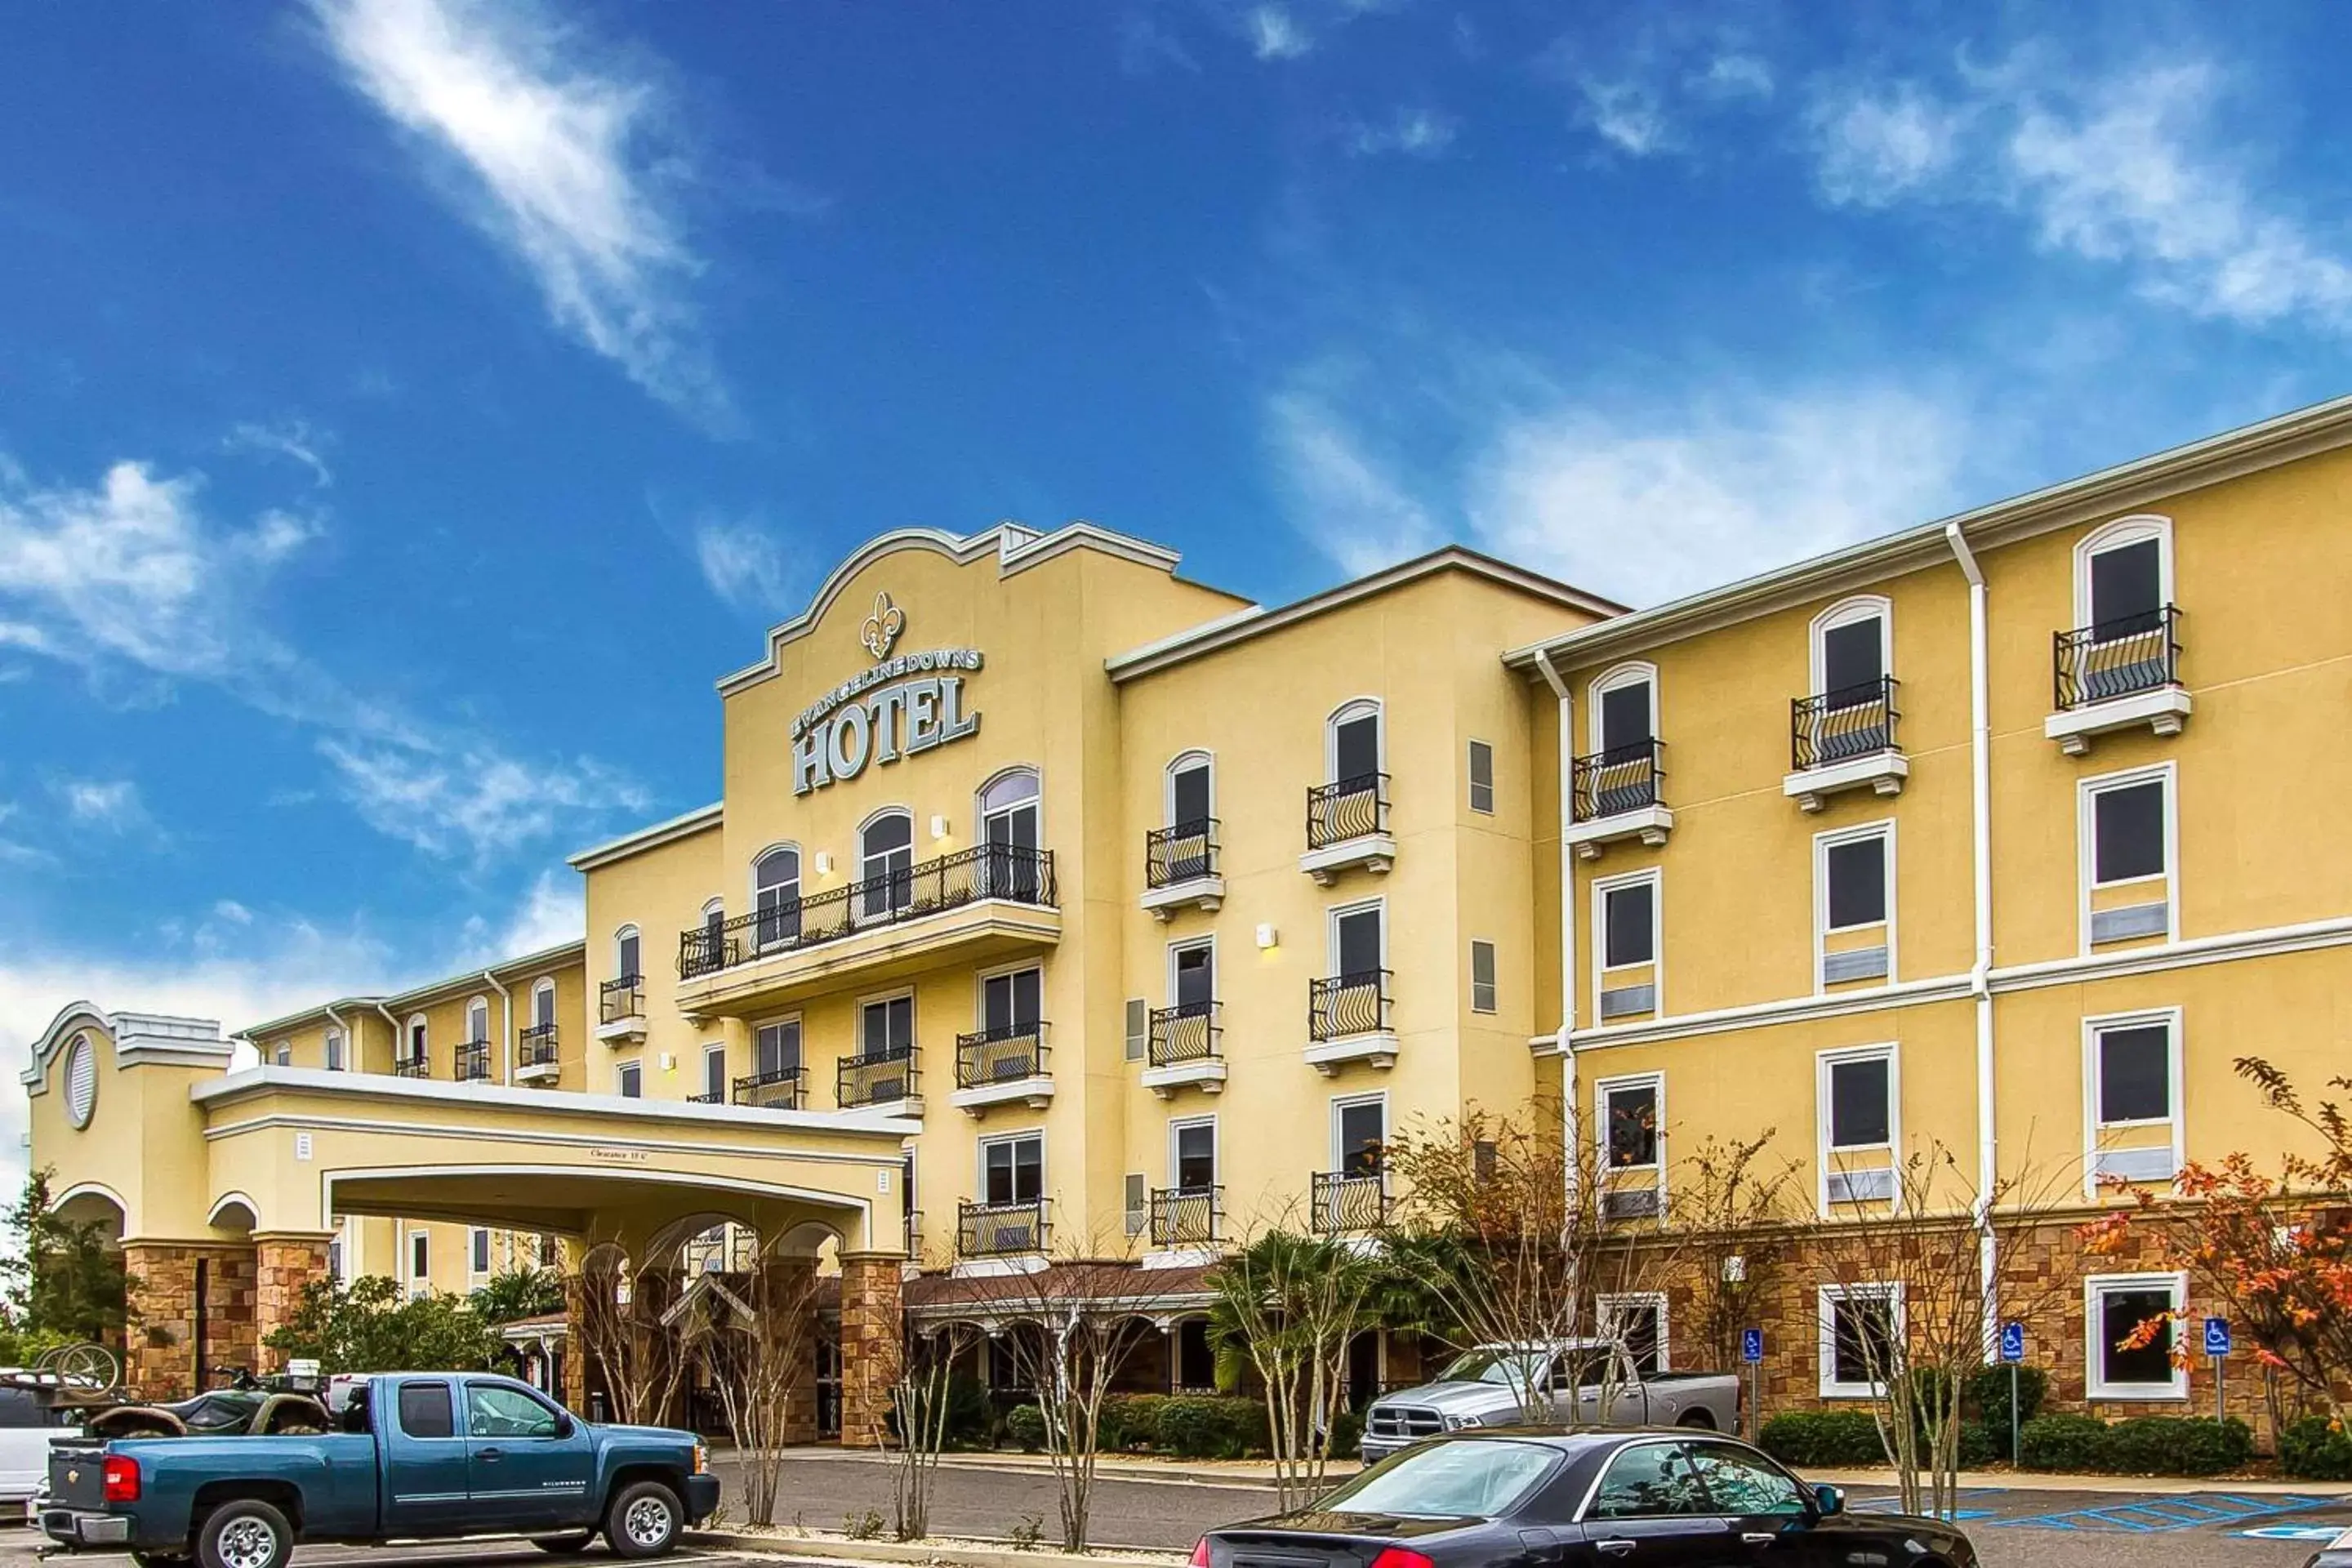 Property building in Evangeline Downs Hotel, Ascend Hotel Collection